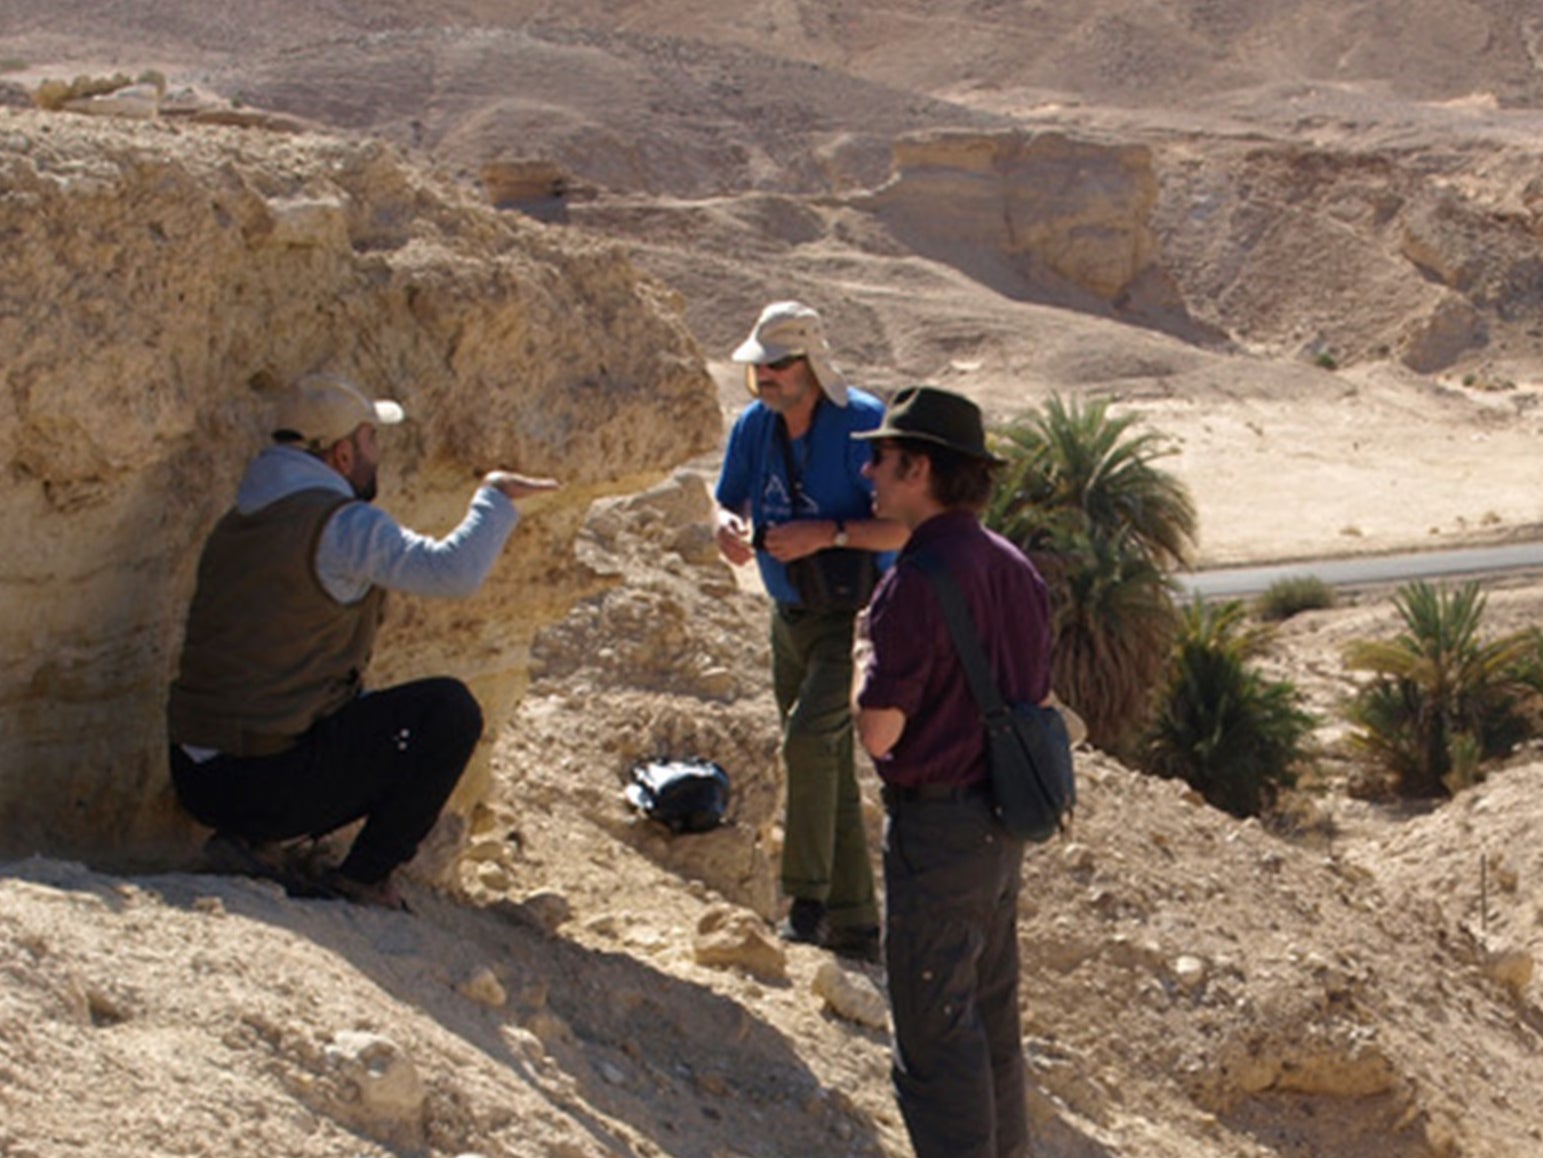 The scientists found human tools dating back 84,000 years in the Jordan Rift Valley